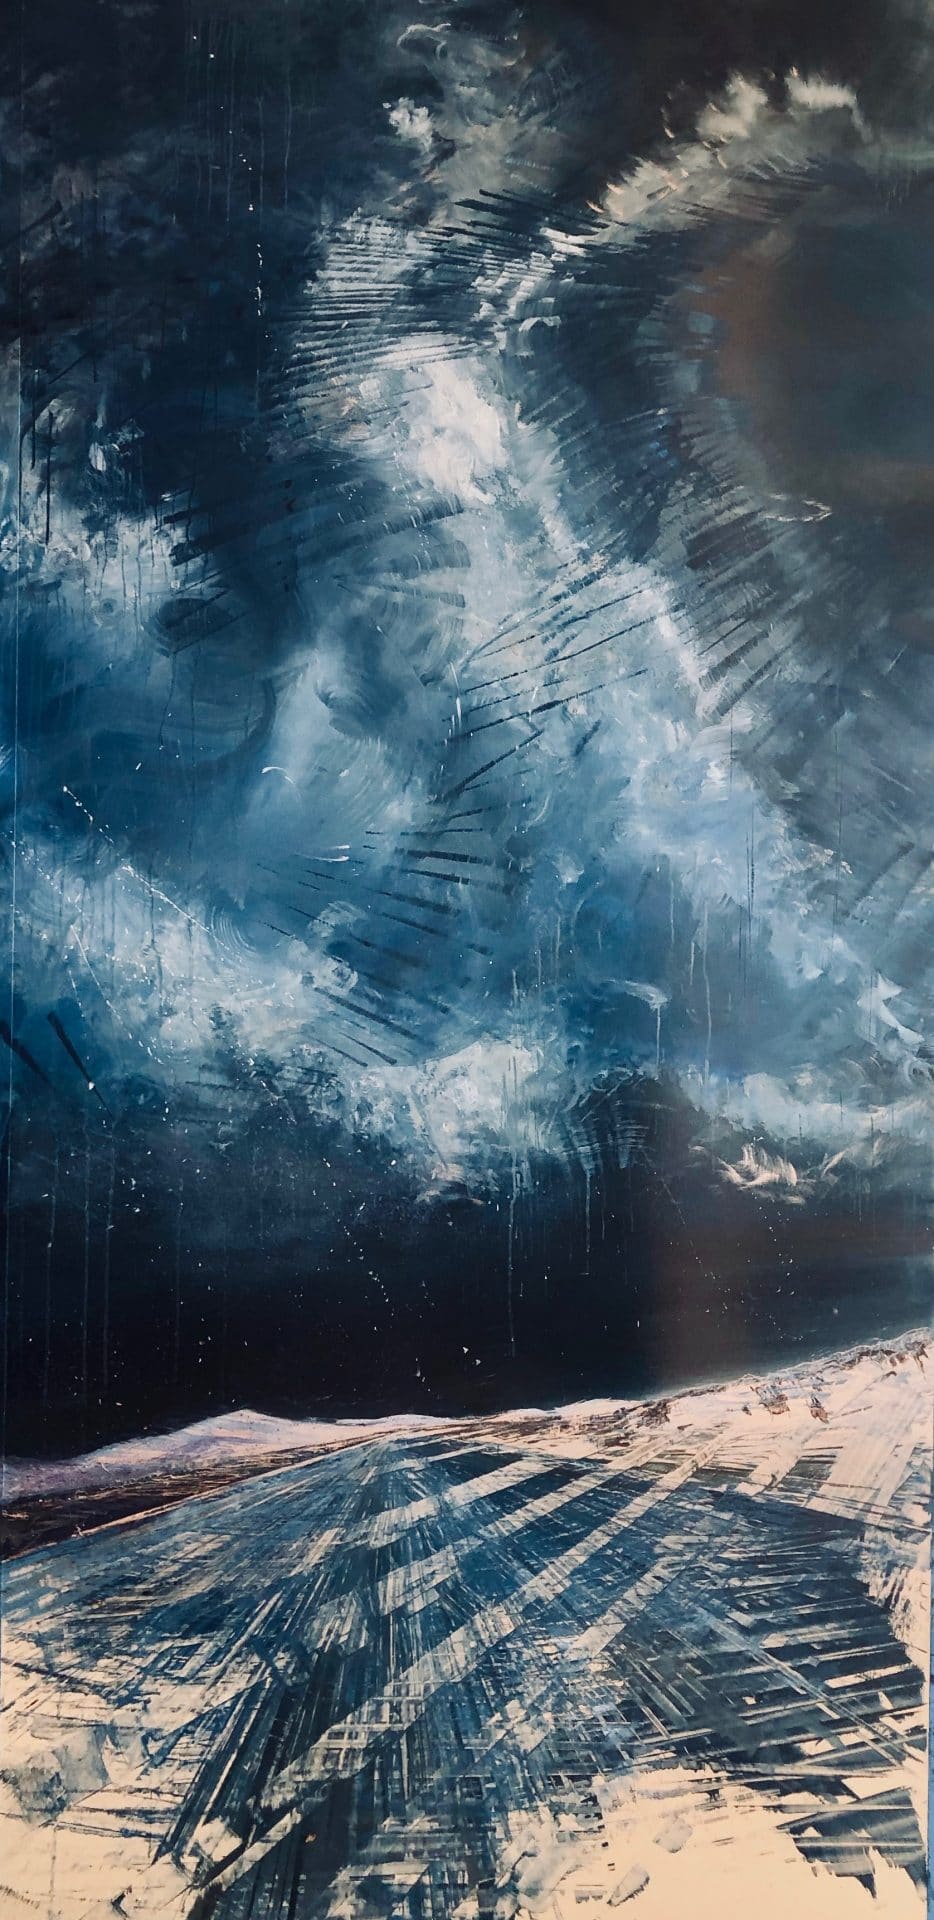 Celestial Rhapsody, oil on a brushed aluminum panel, 99" x 51", $16,900